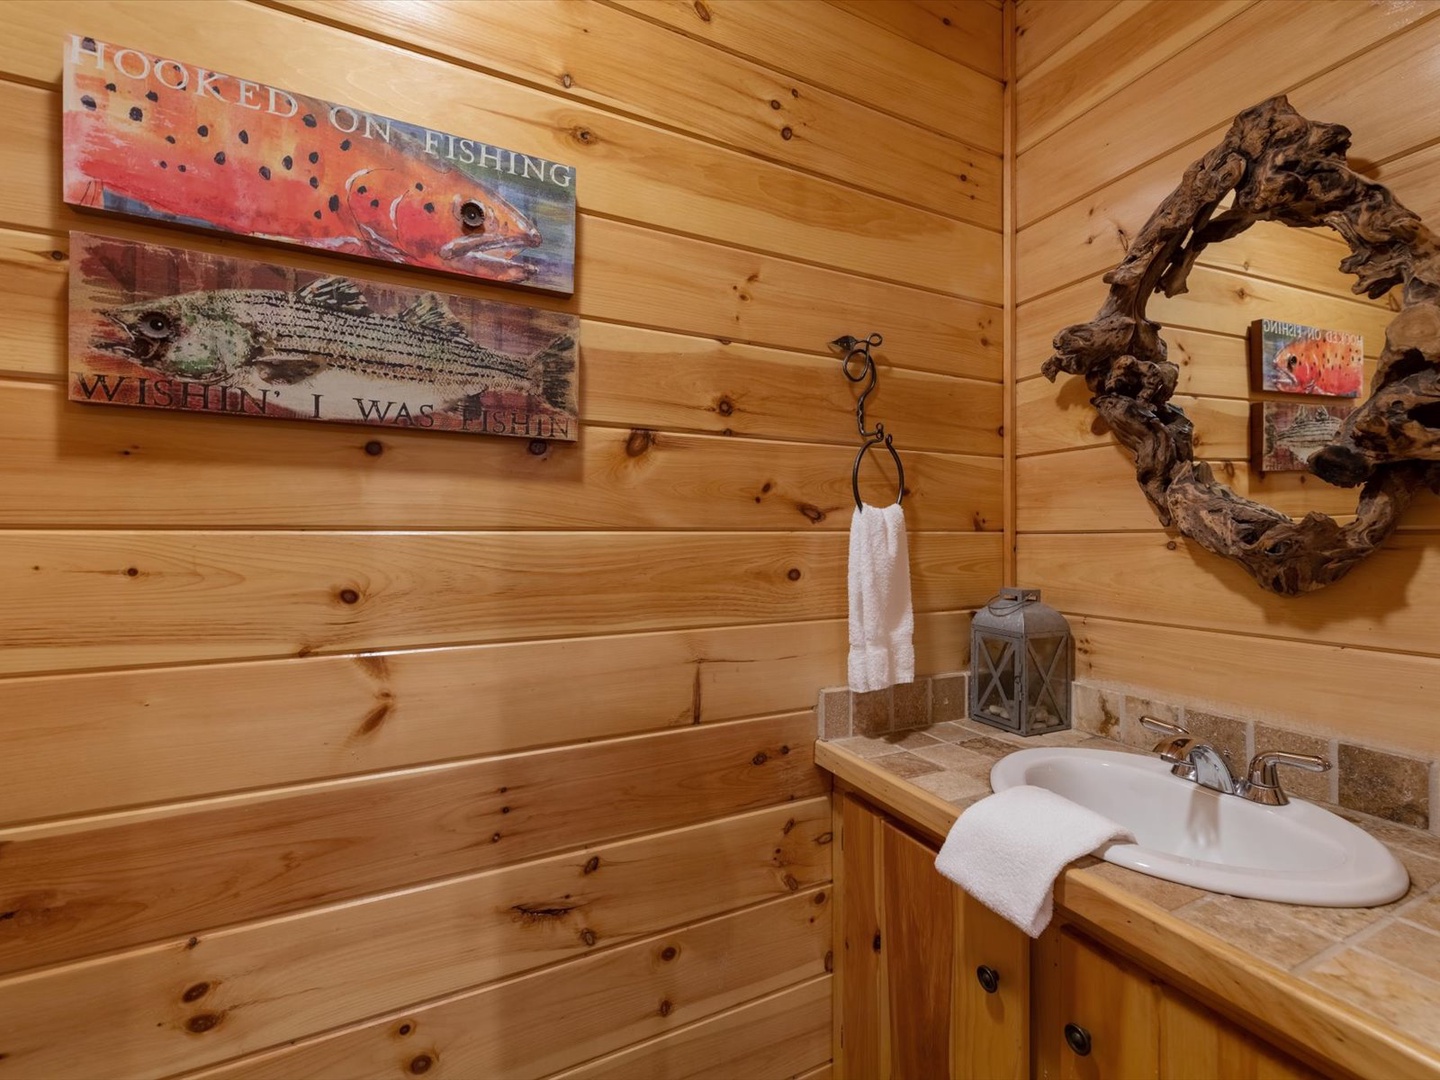 Medley Sunset Cove- Entry shared bathroom space